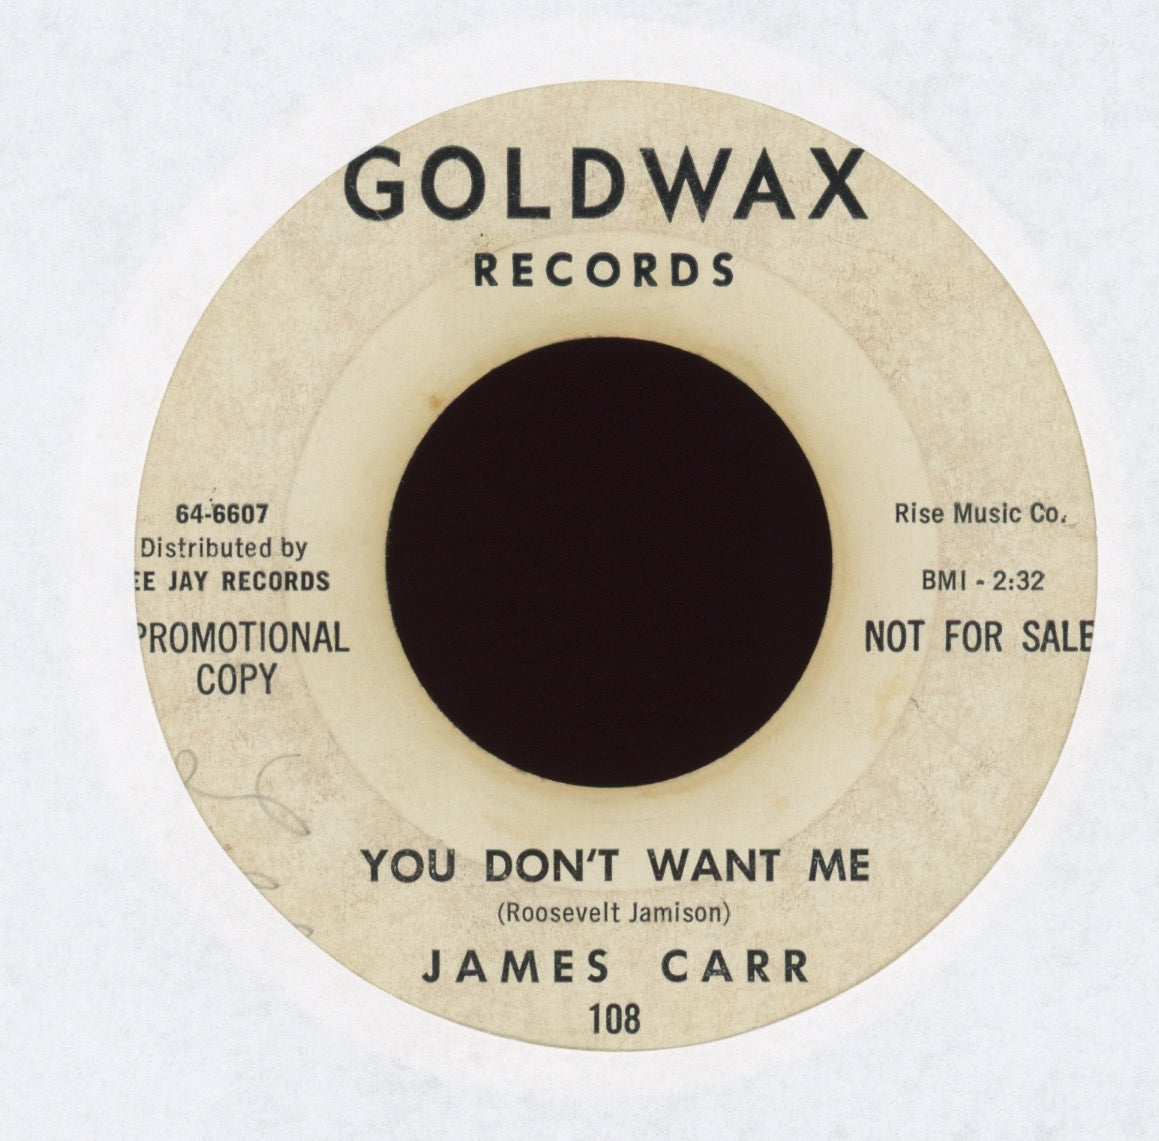 James Carr - Only Fools Run Away on Goldwax Promo